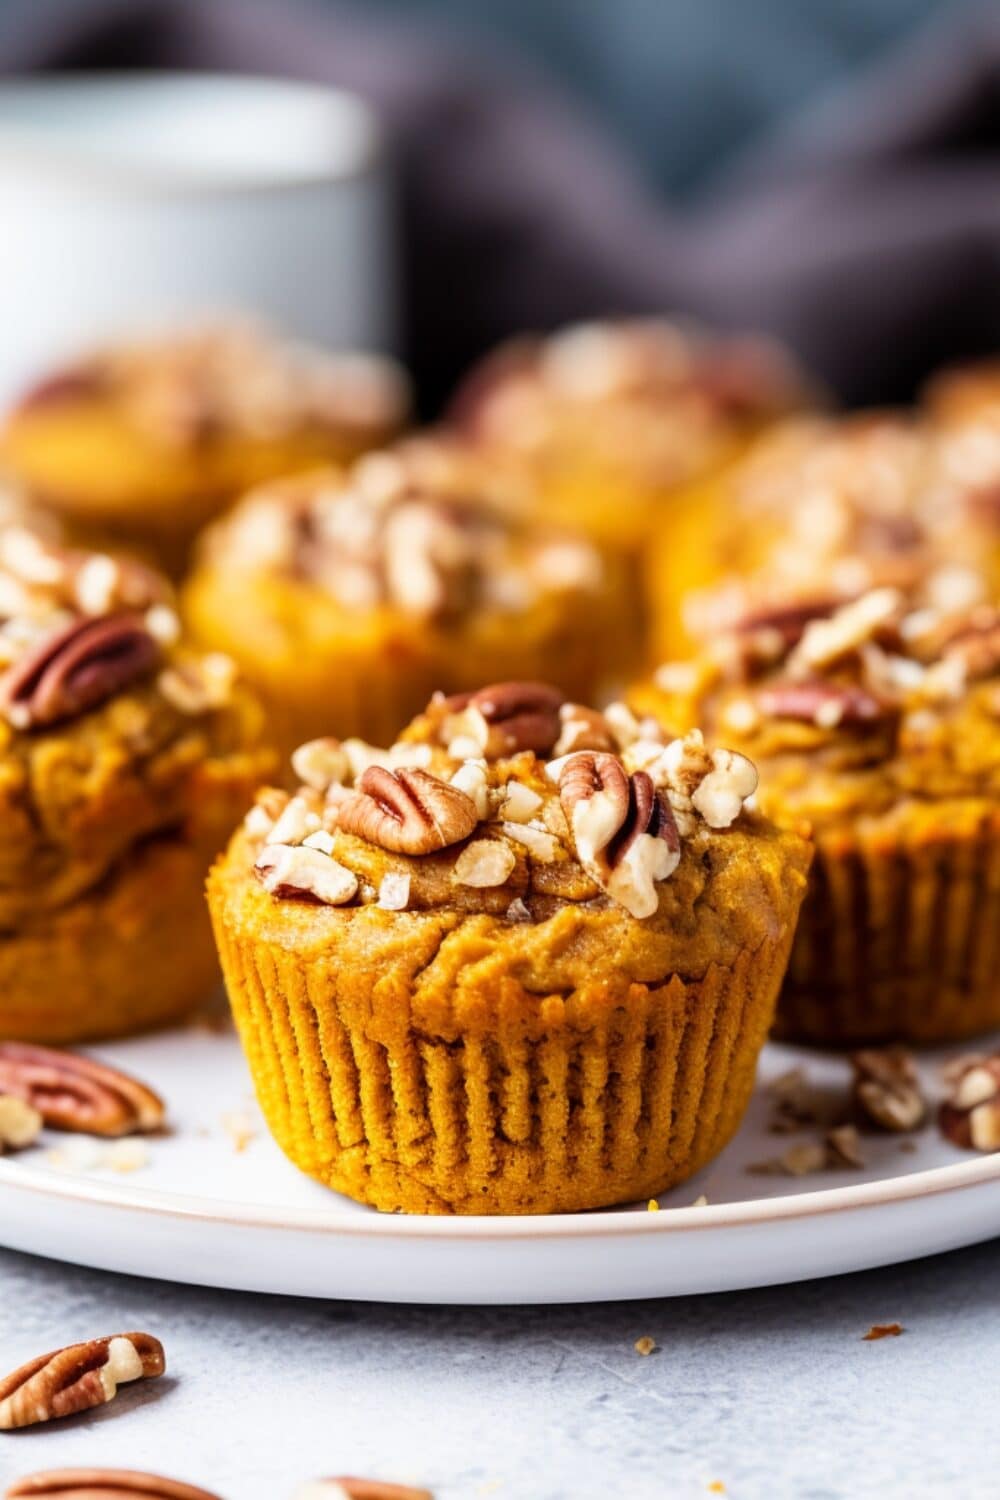 Golden-brown pumpkin muffins on a white plate, with pecans on top.